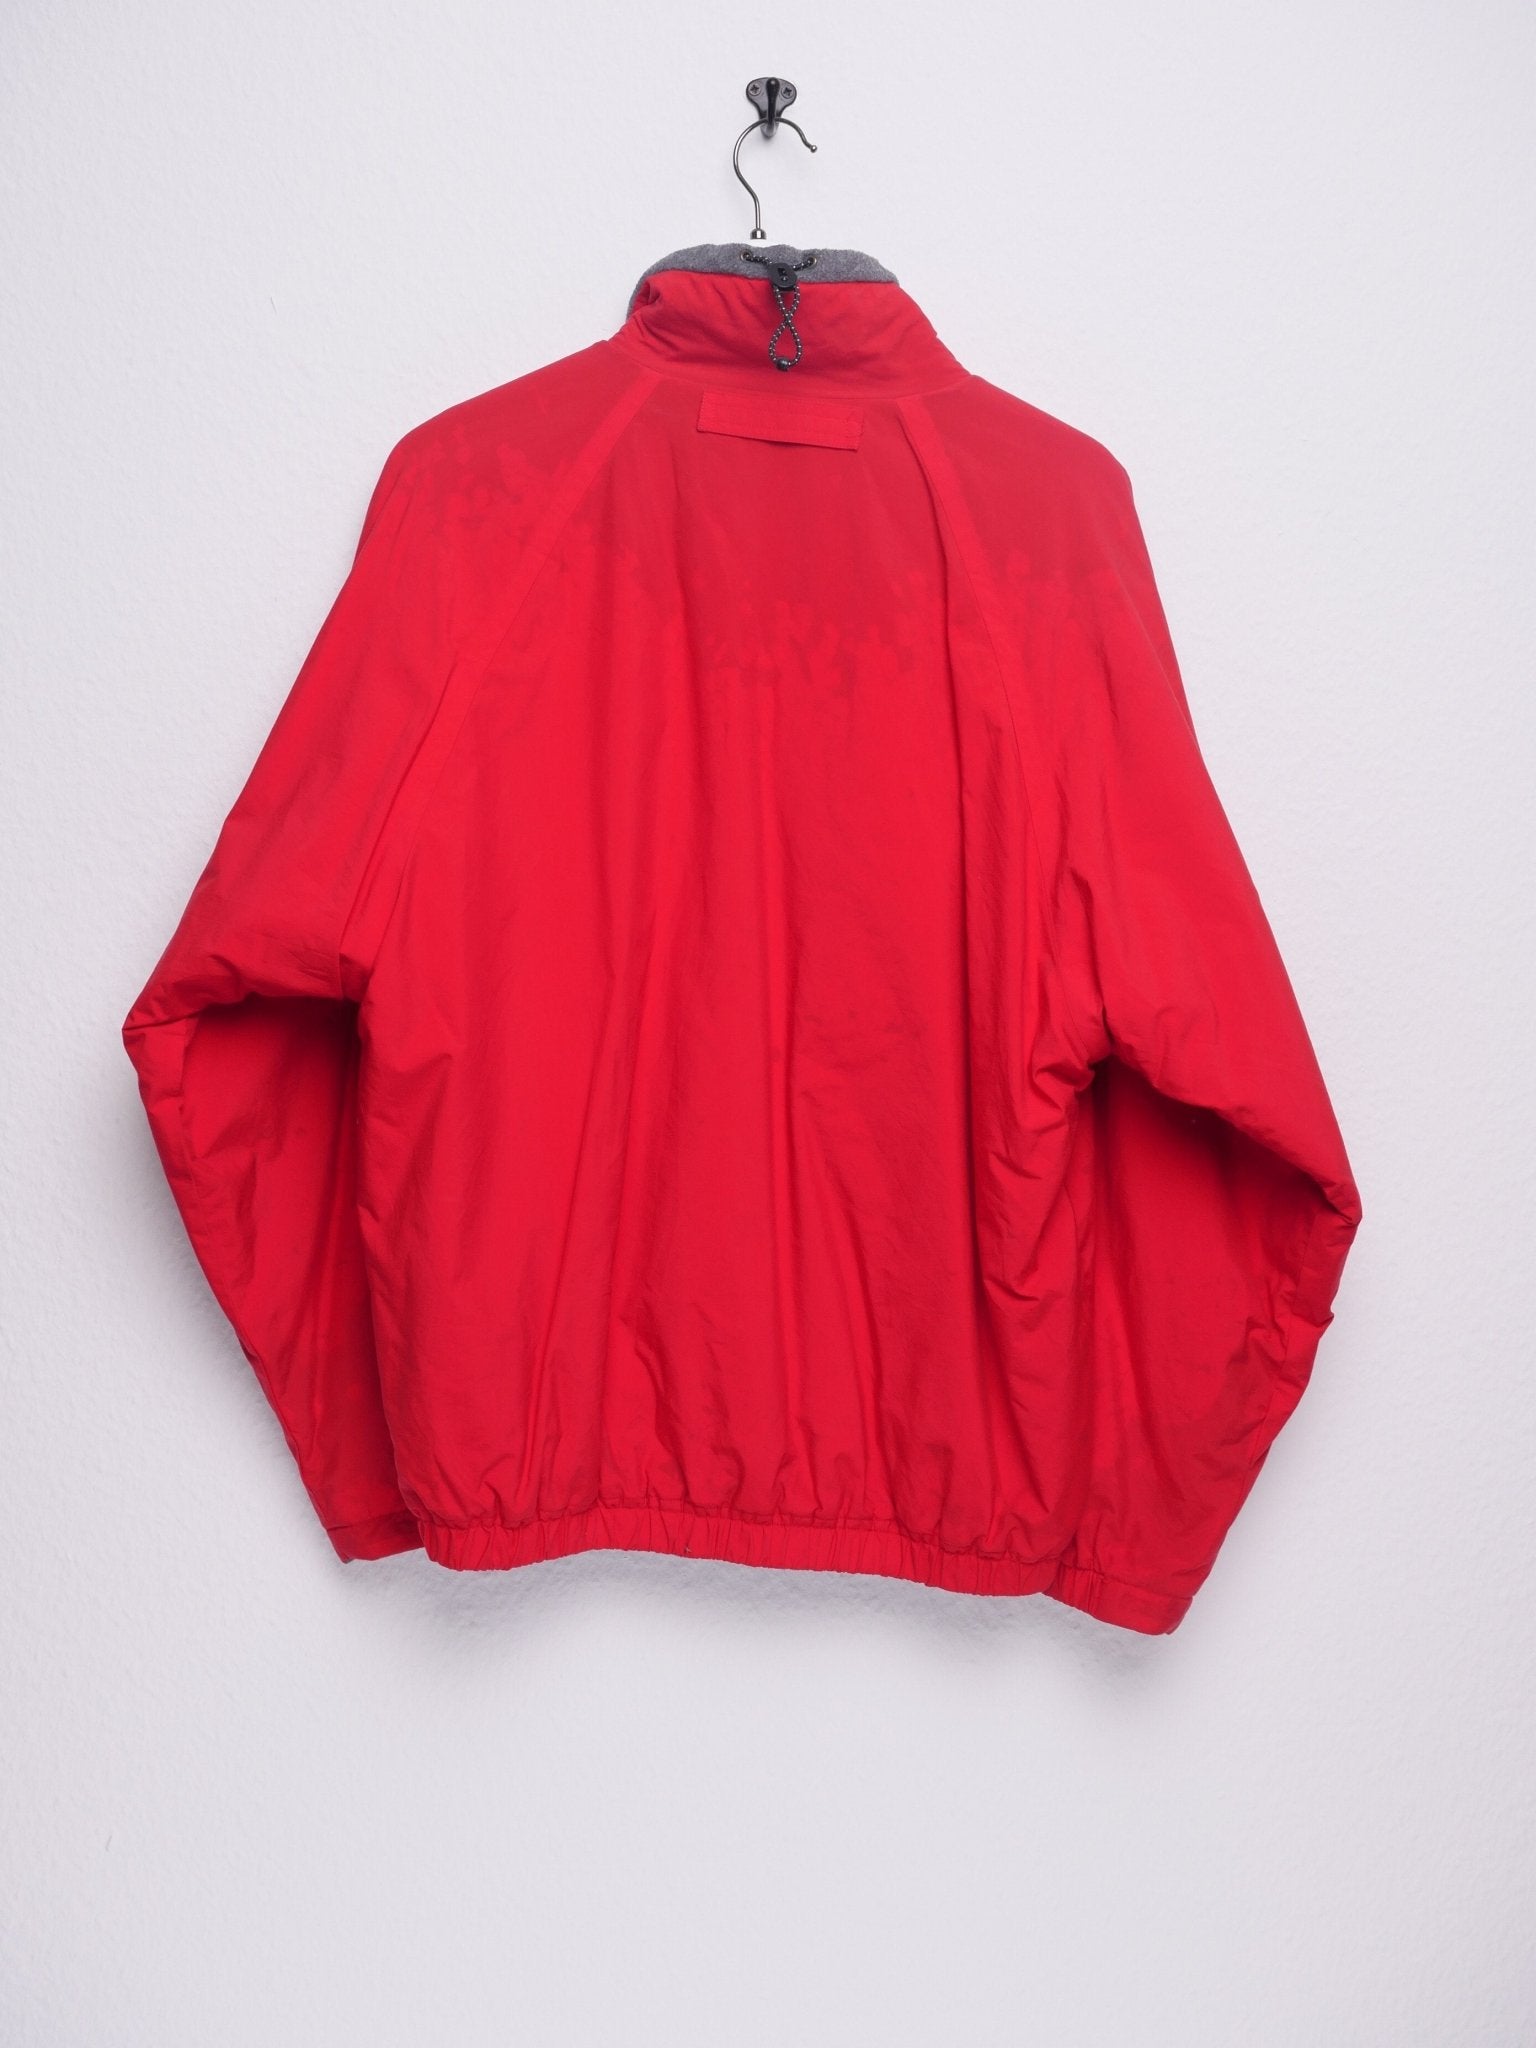 nautica embroidered Spellout red heavy Track Jacket - Peeces